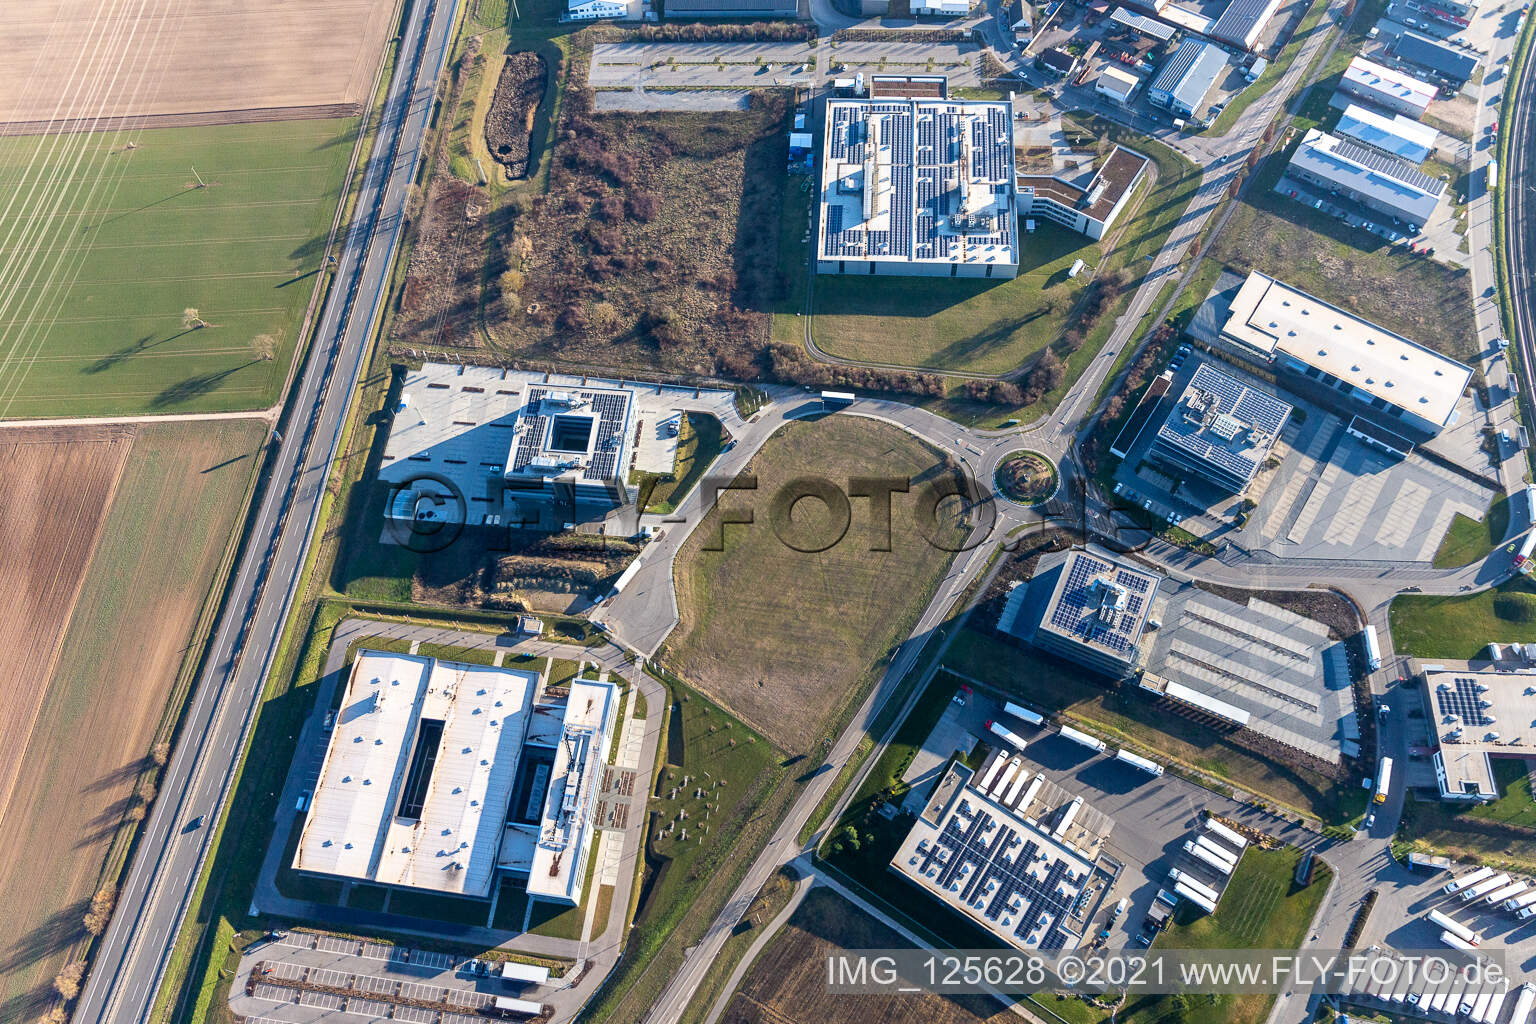 Oblique view of North industrial area in Rülzheim in the state Rhineland-Palatinate, Germany